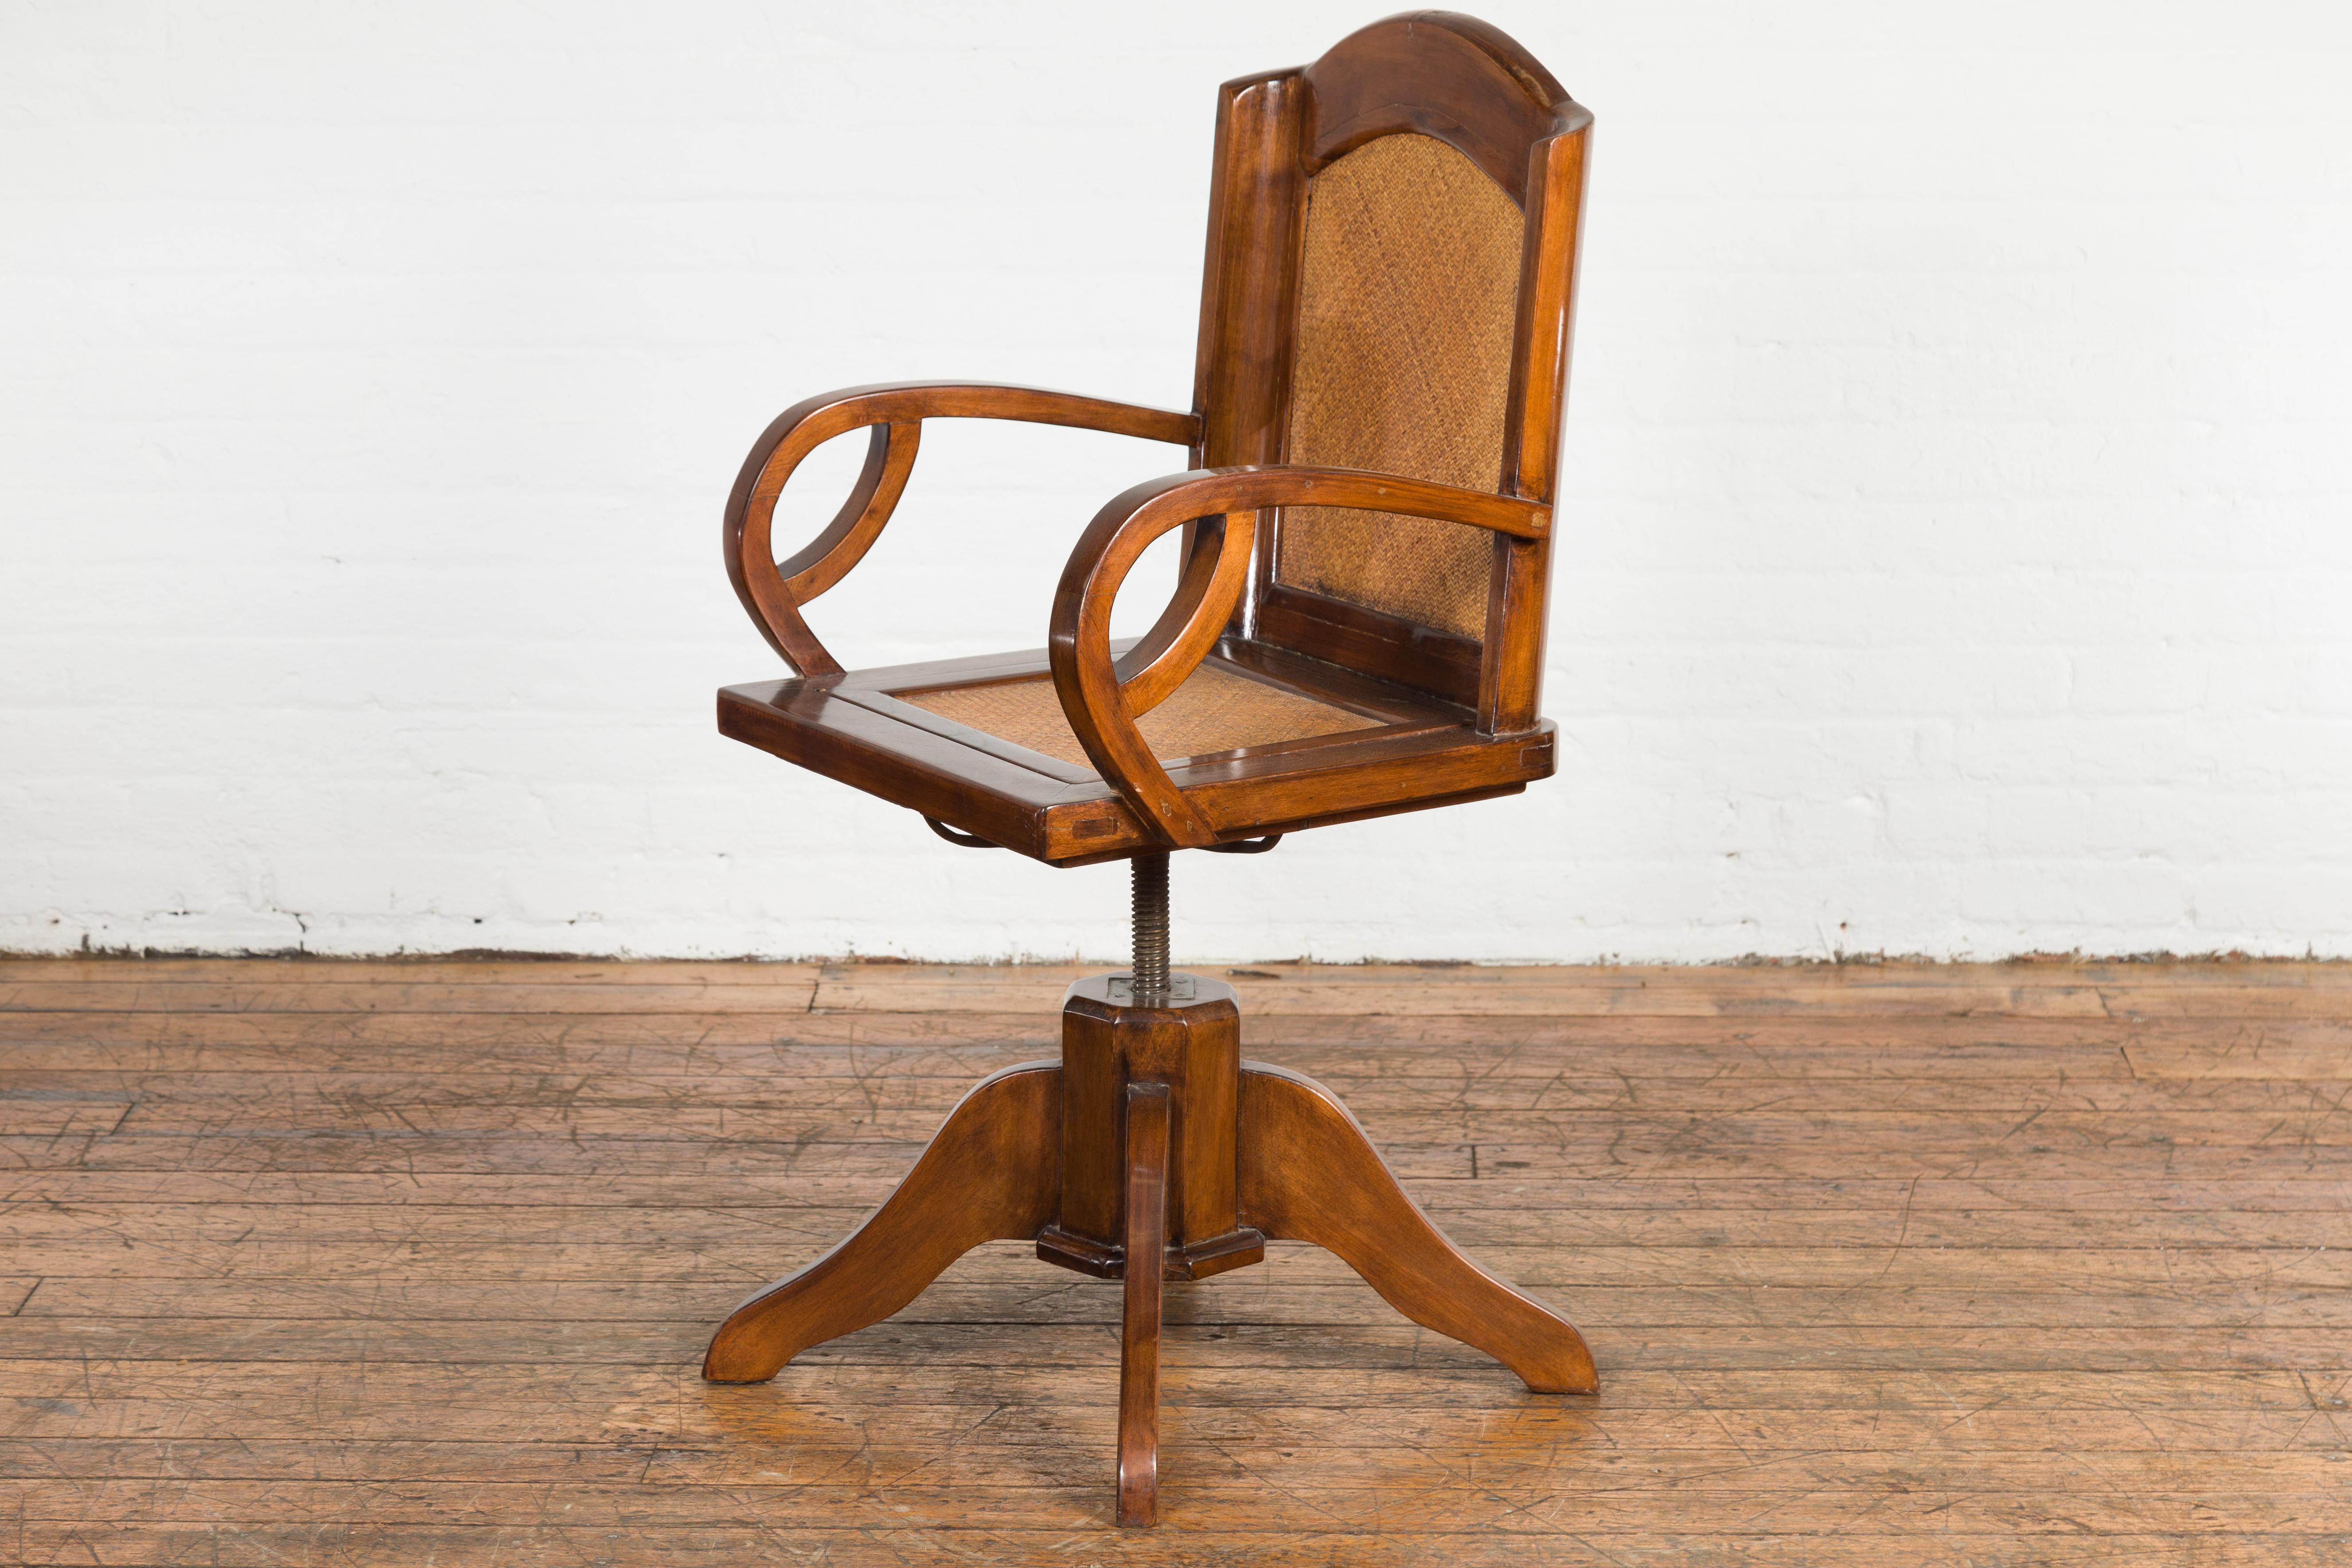 20th Century 1940s Art Deco Style Swivel Desk Chair with Woven Rattan and Loop Arms For Sale